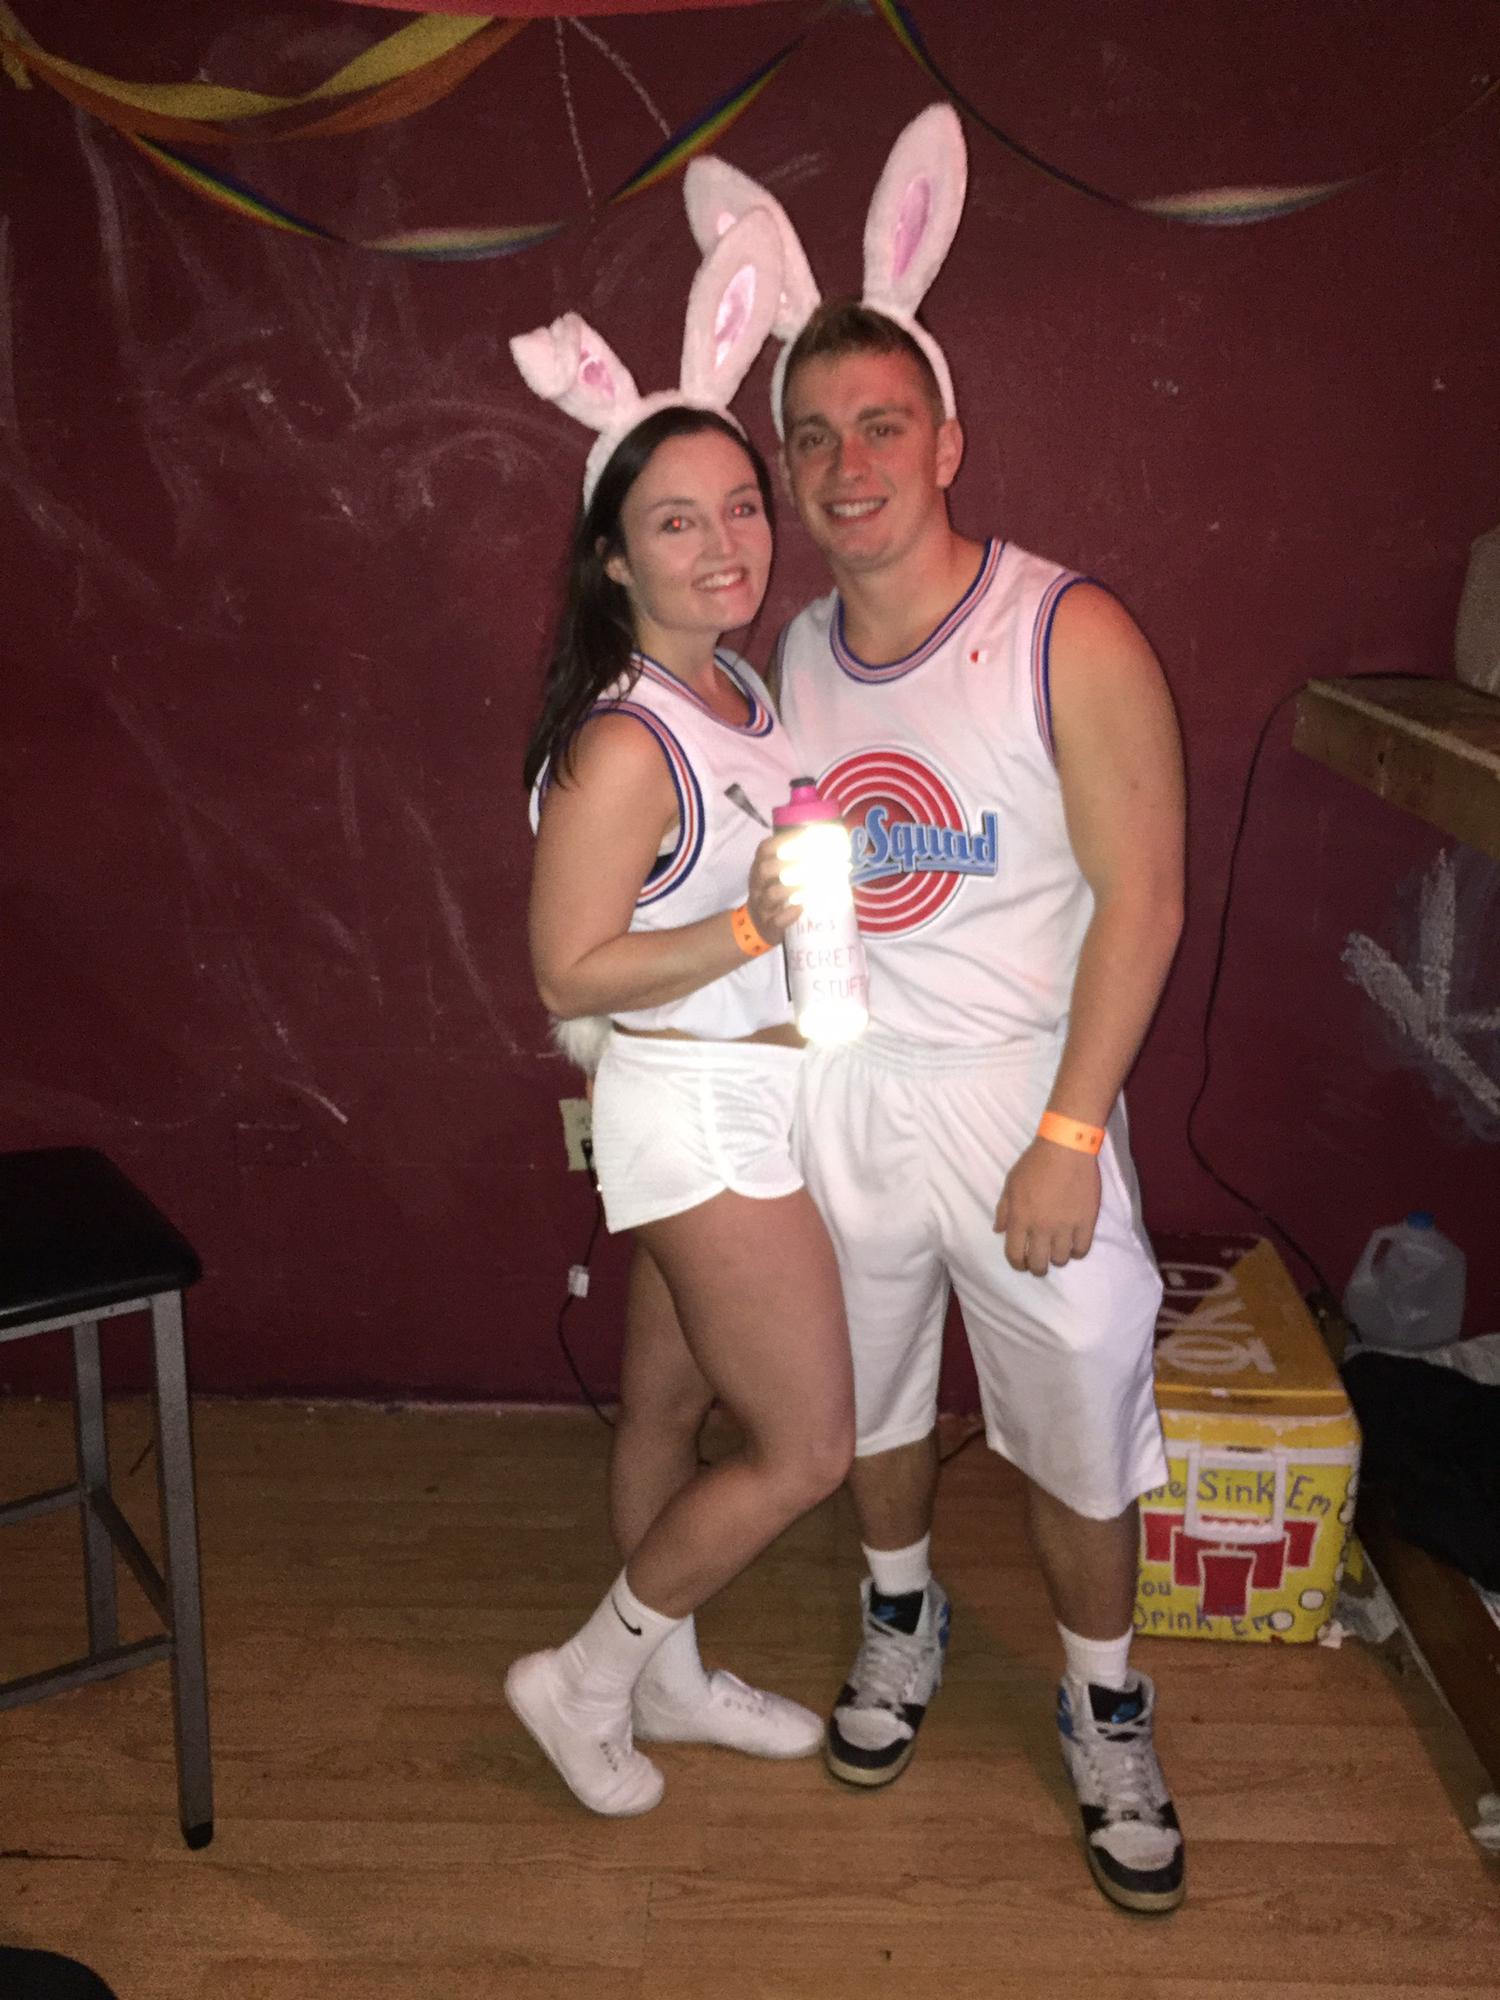 Our second Halloween together. Bugs and Lola from space jam.